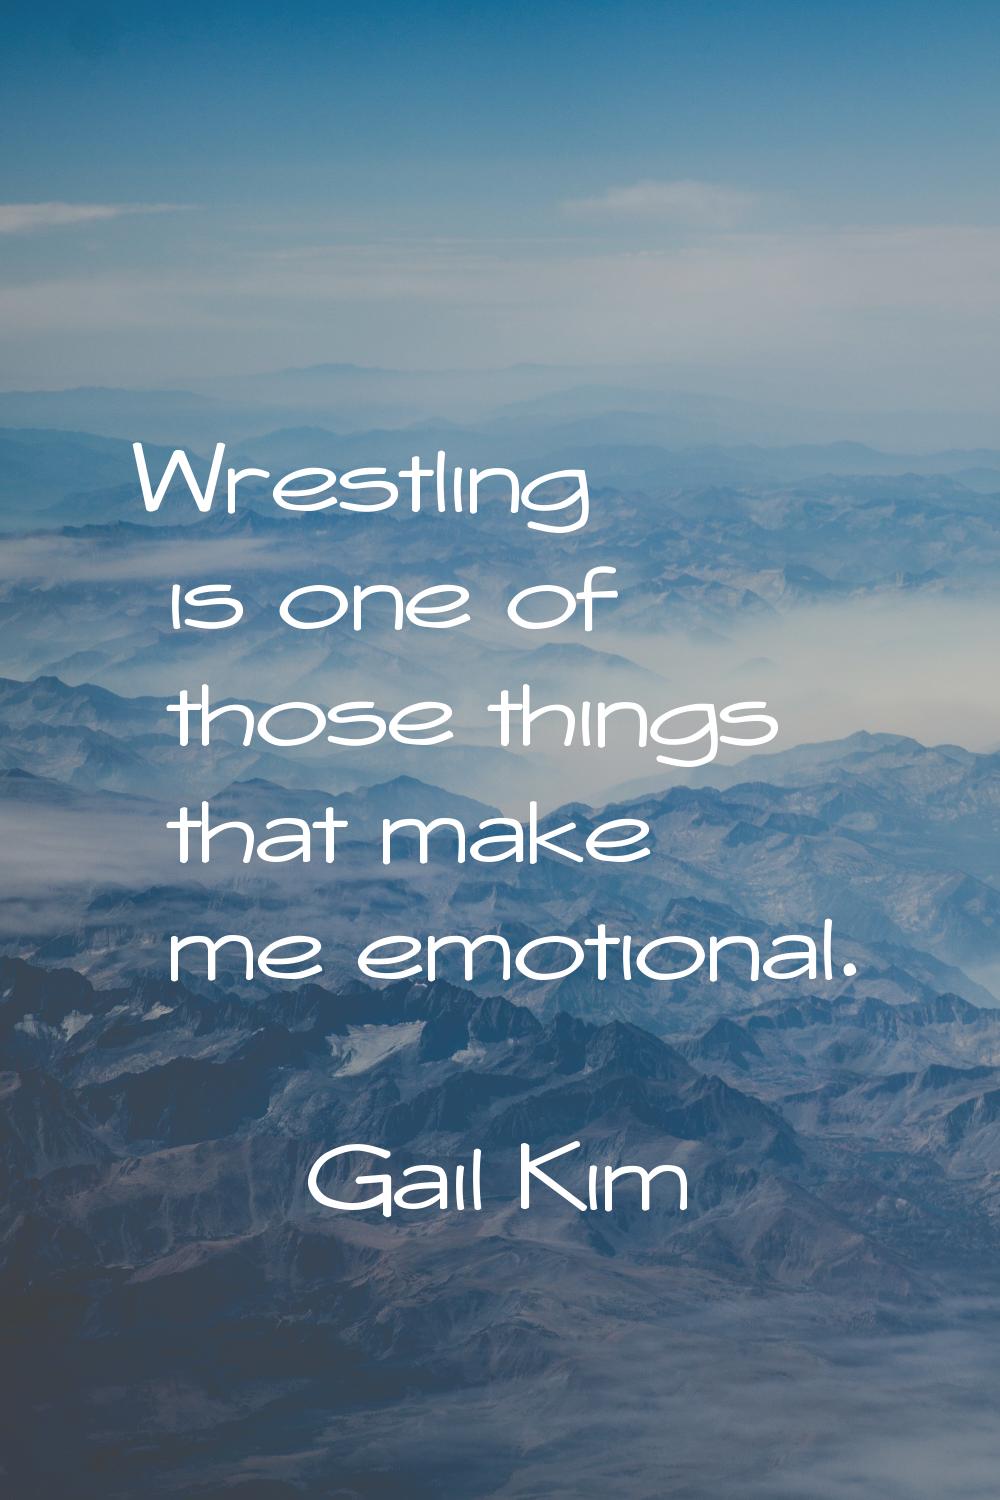 Wrestling is one of those things that make me emotional.